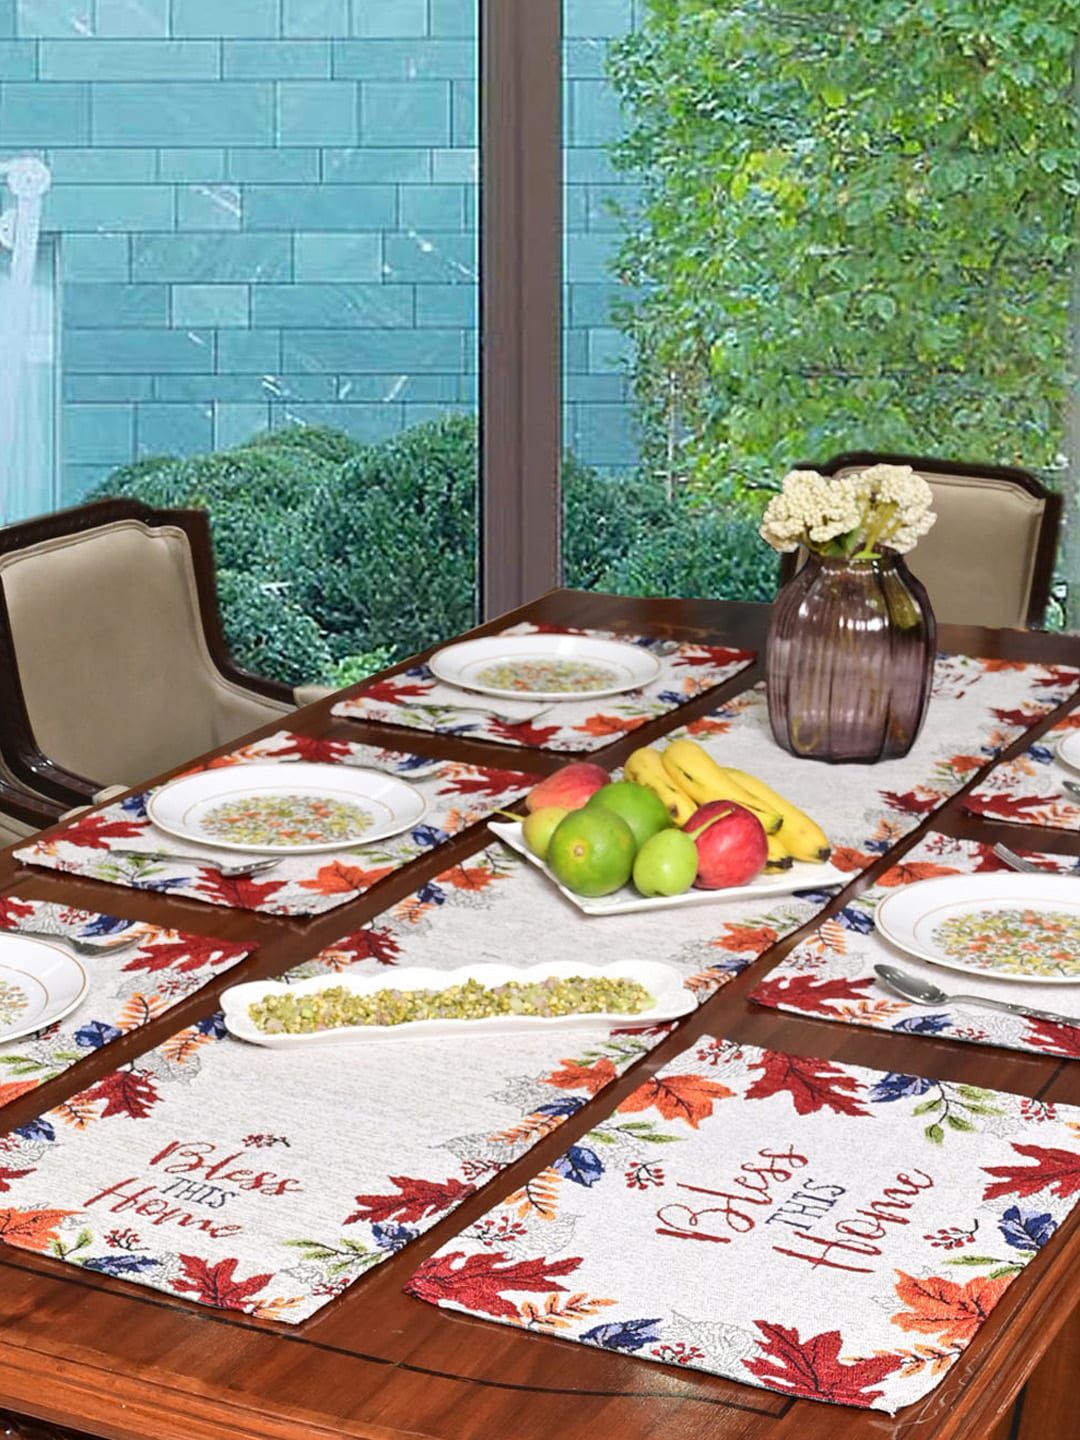 AVI Living Set Of 7 White & Maroon Floral Jacquard Woven Table Placement & Runner Set Price in India